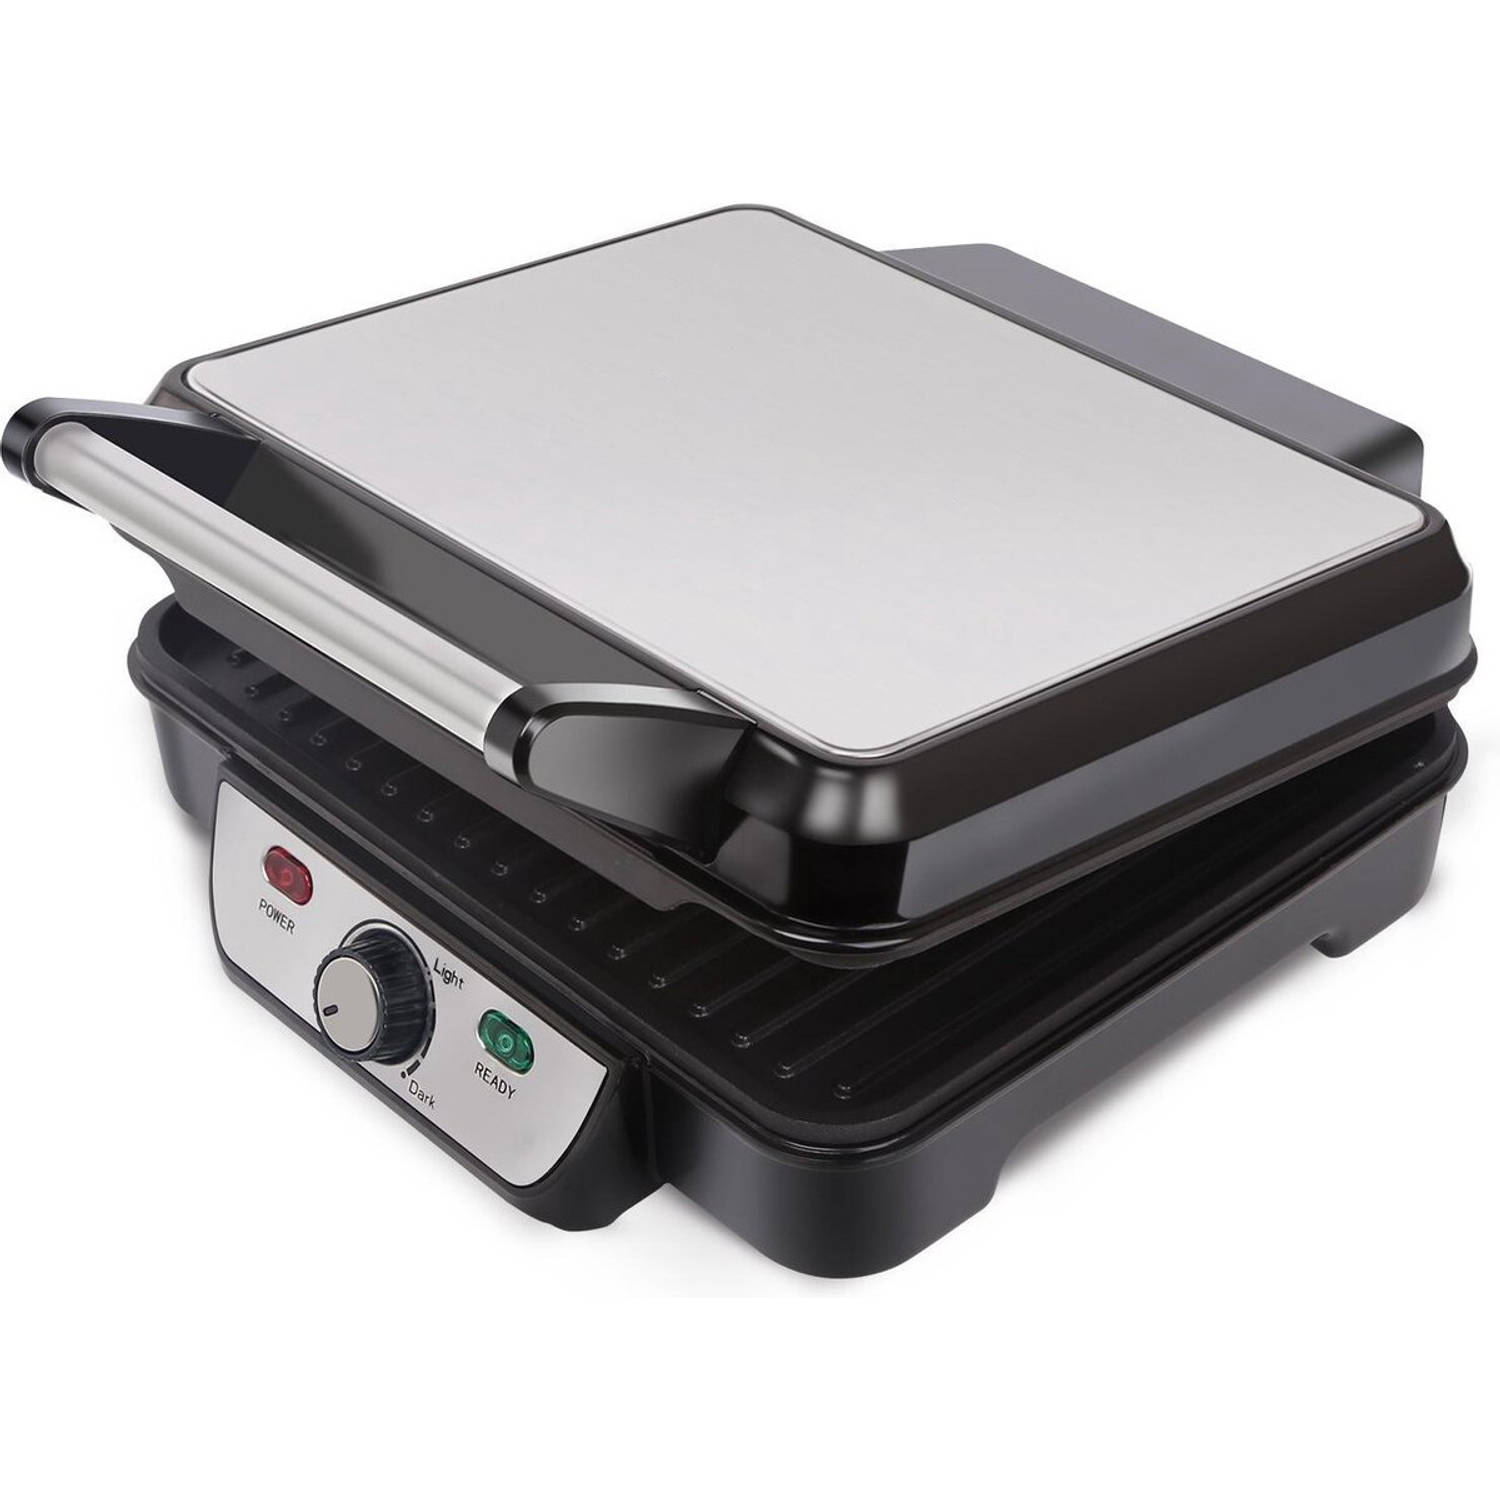 Contactgrill Tosti Apparaat Tosti Ijzer Aigi Cale Cool Touch Rvs Zwart-zilver